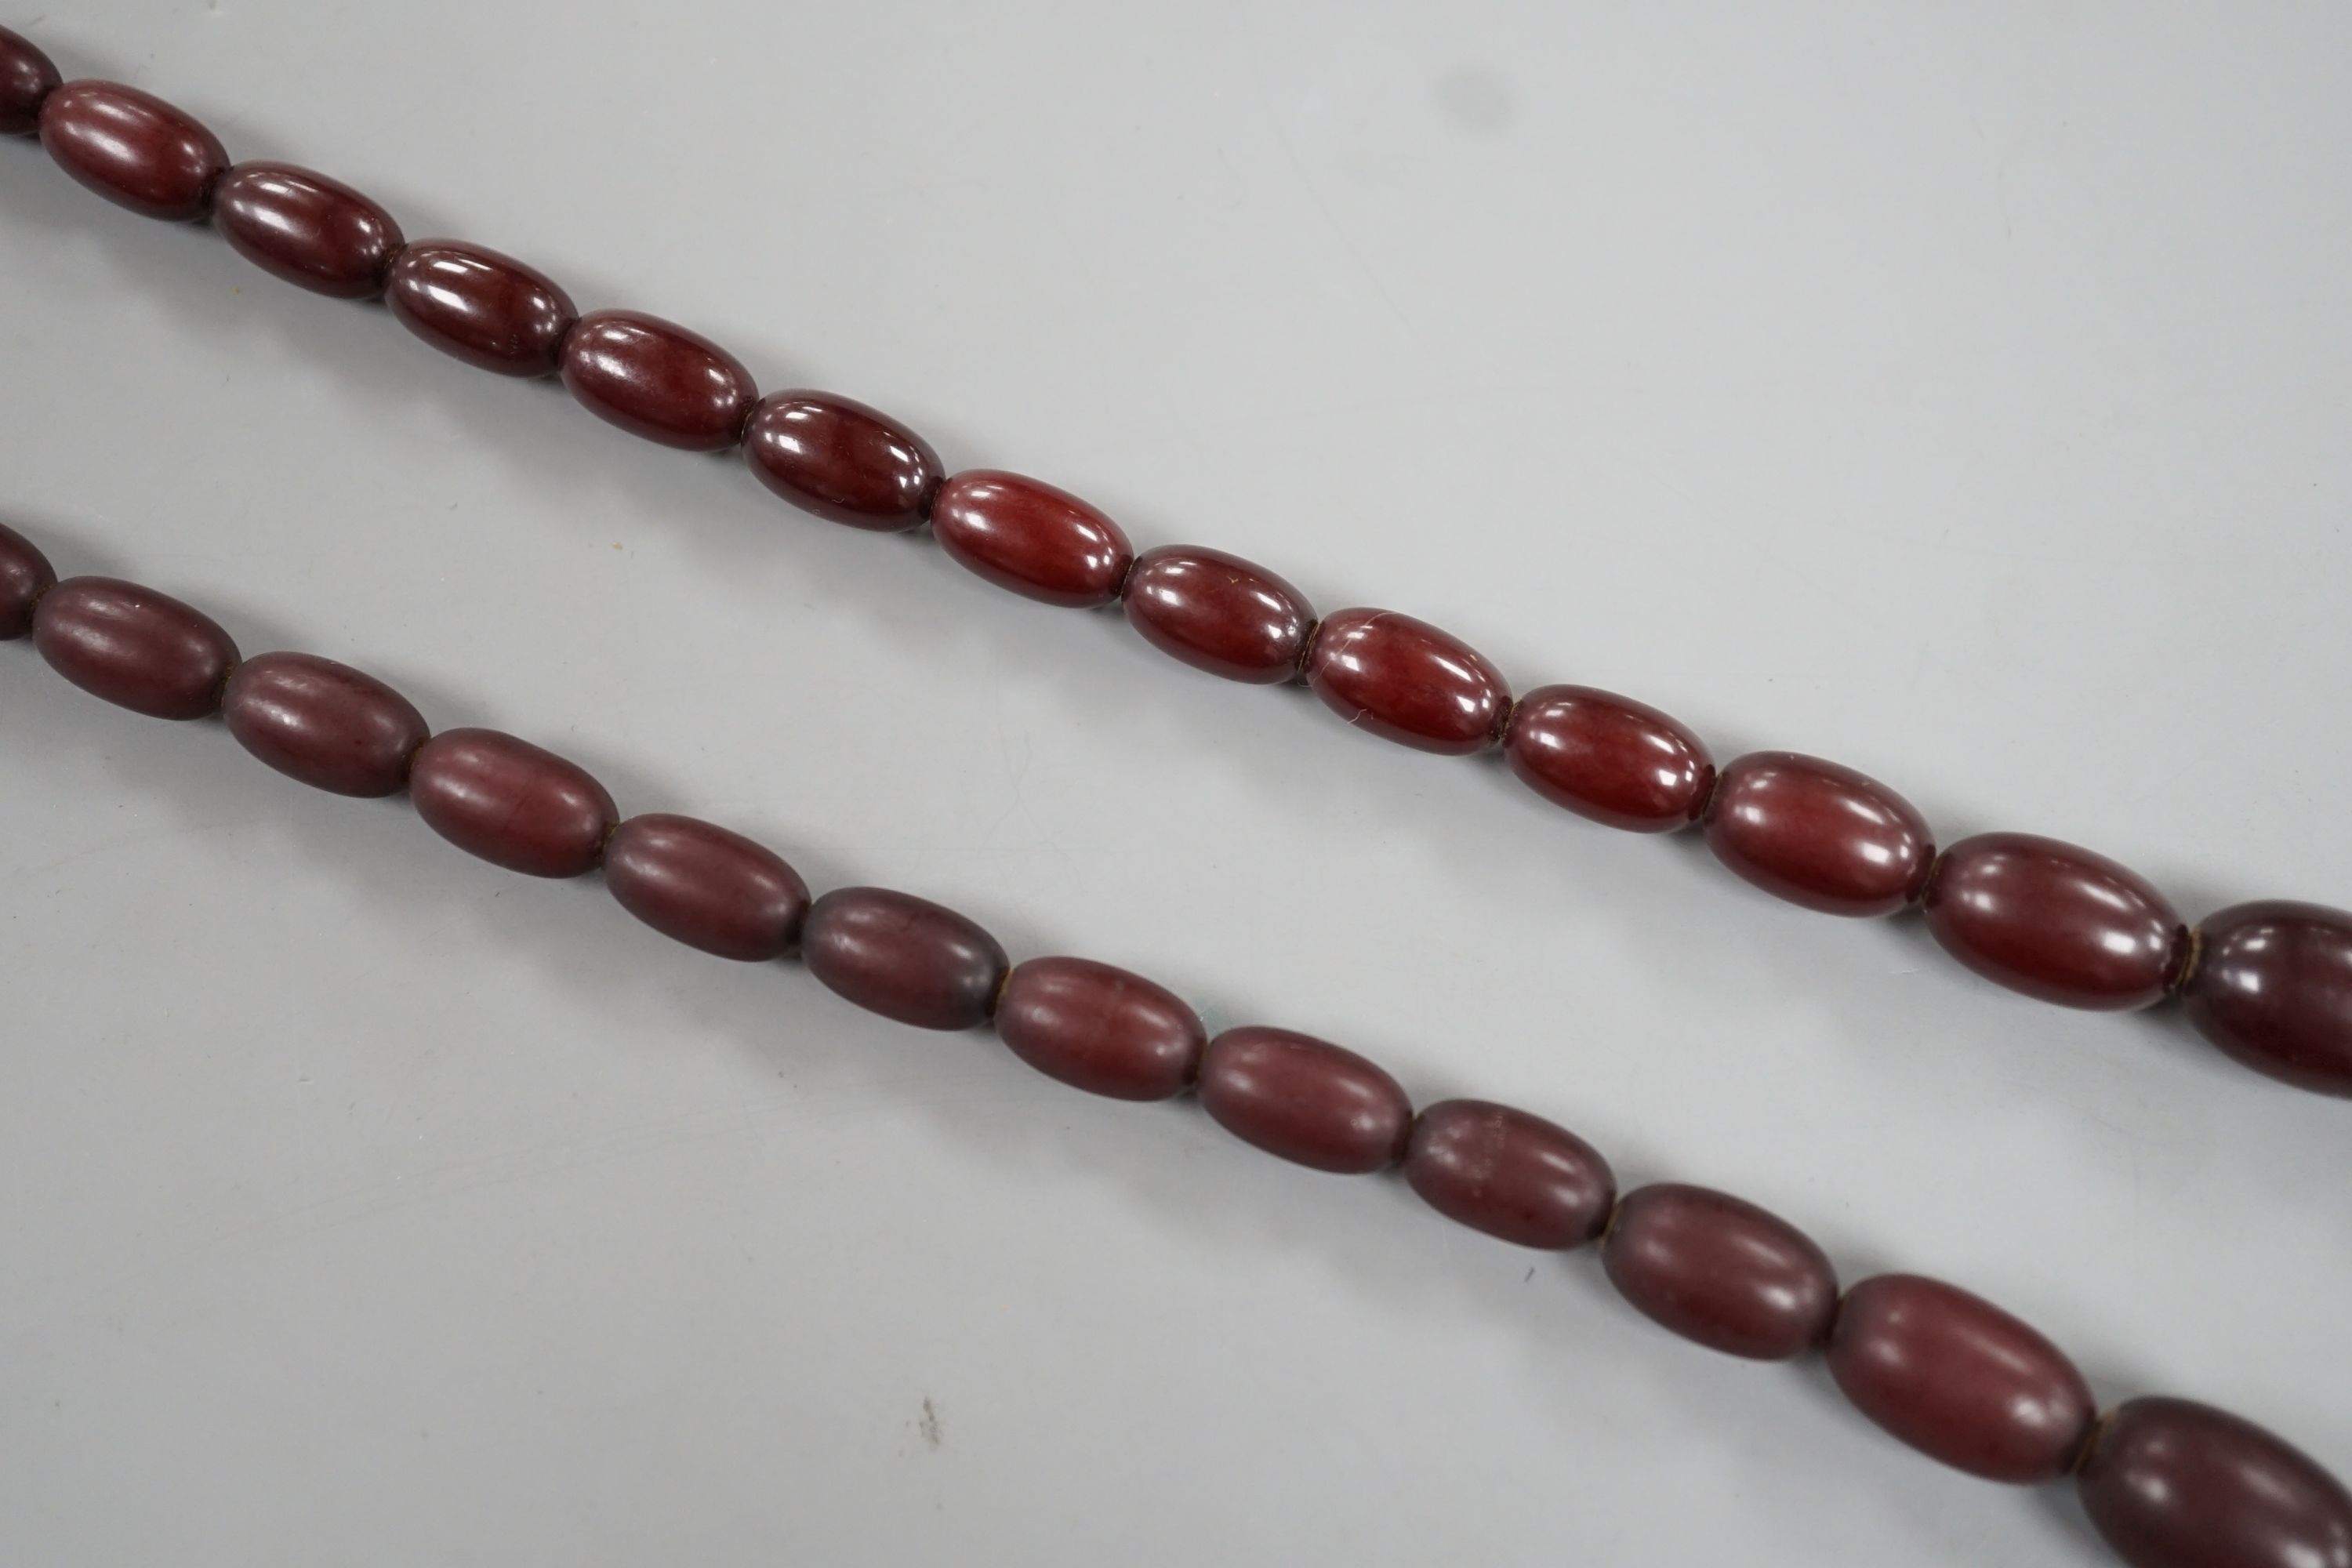 A single strand graduated oval bakelite bead necklace, 71cm, gross weight 60 grams.